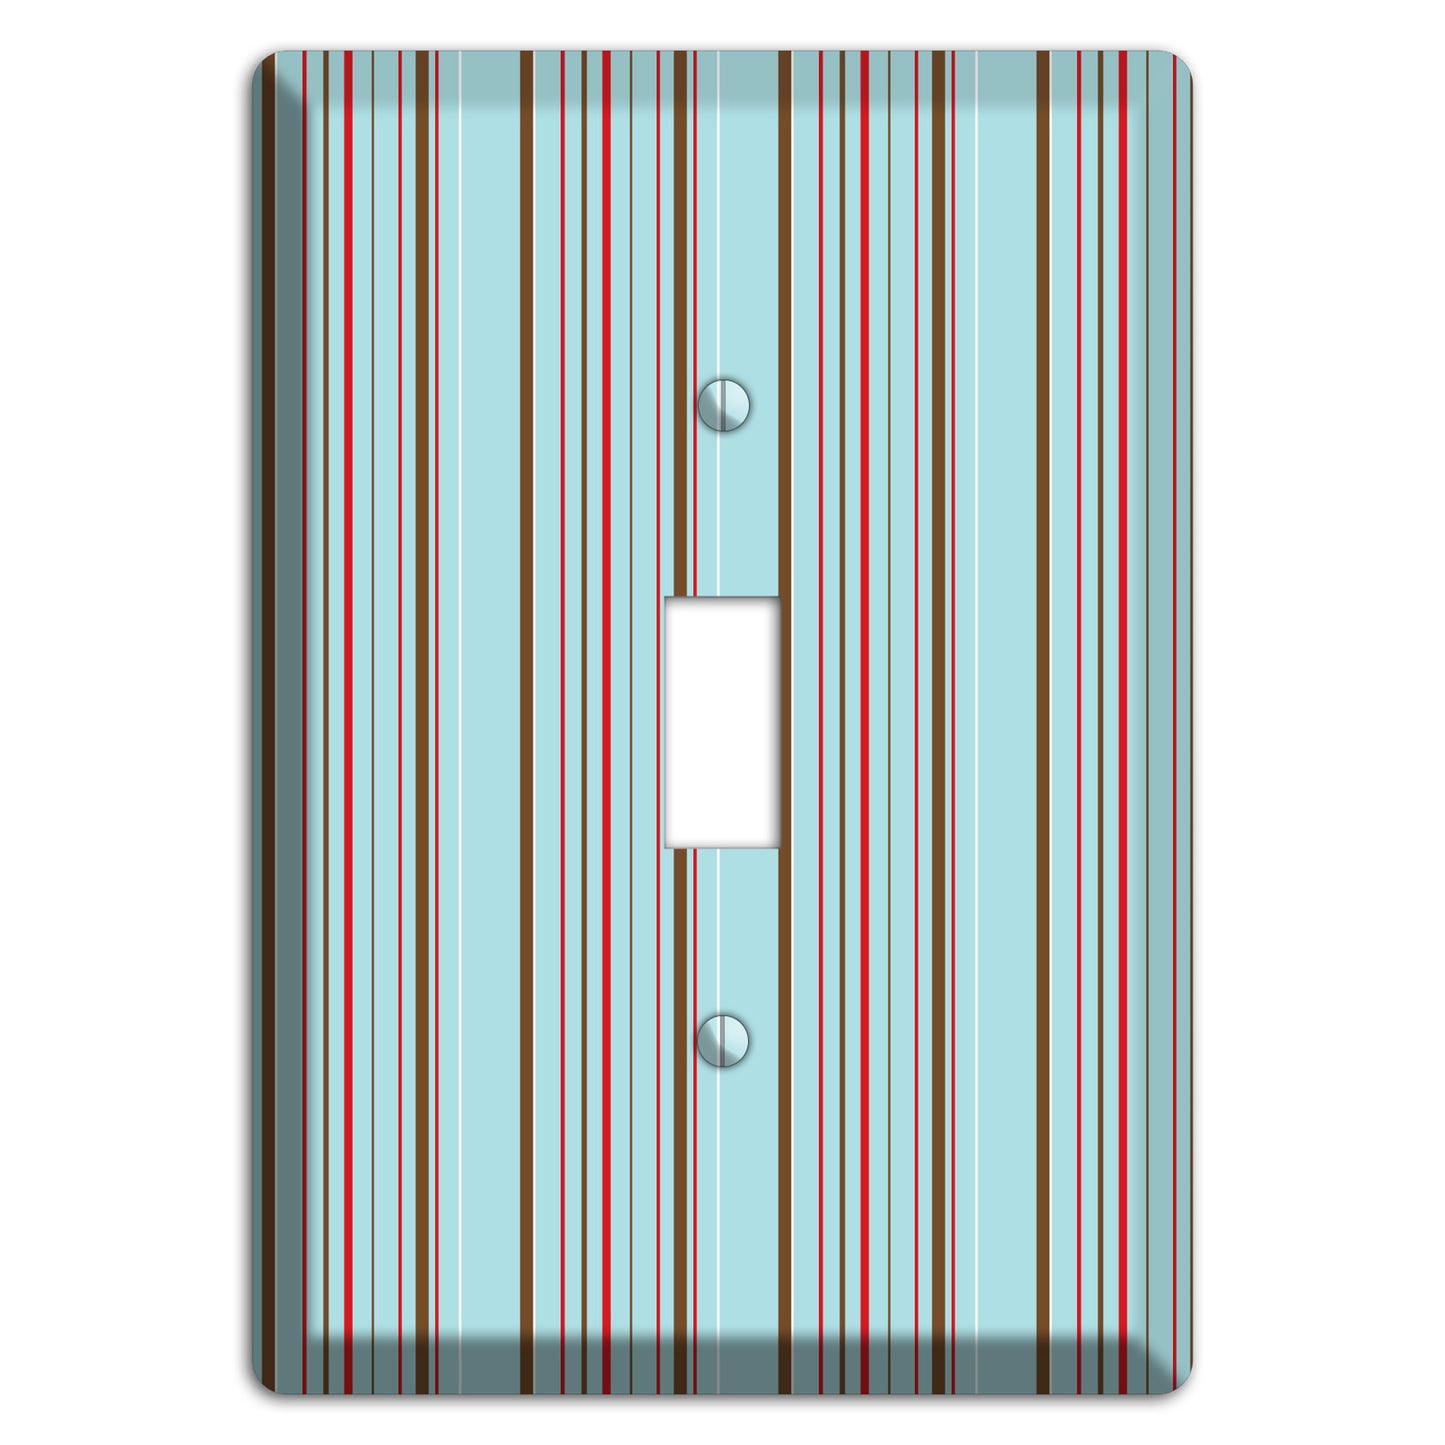 Dusty Blue with Red and Brown Vertical Stripes Cover Plates